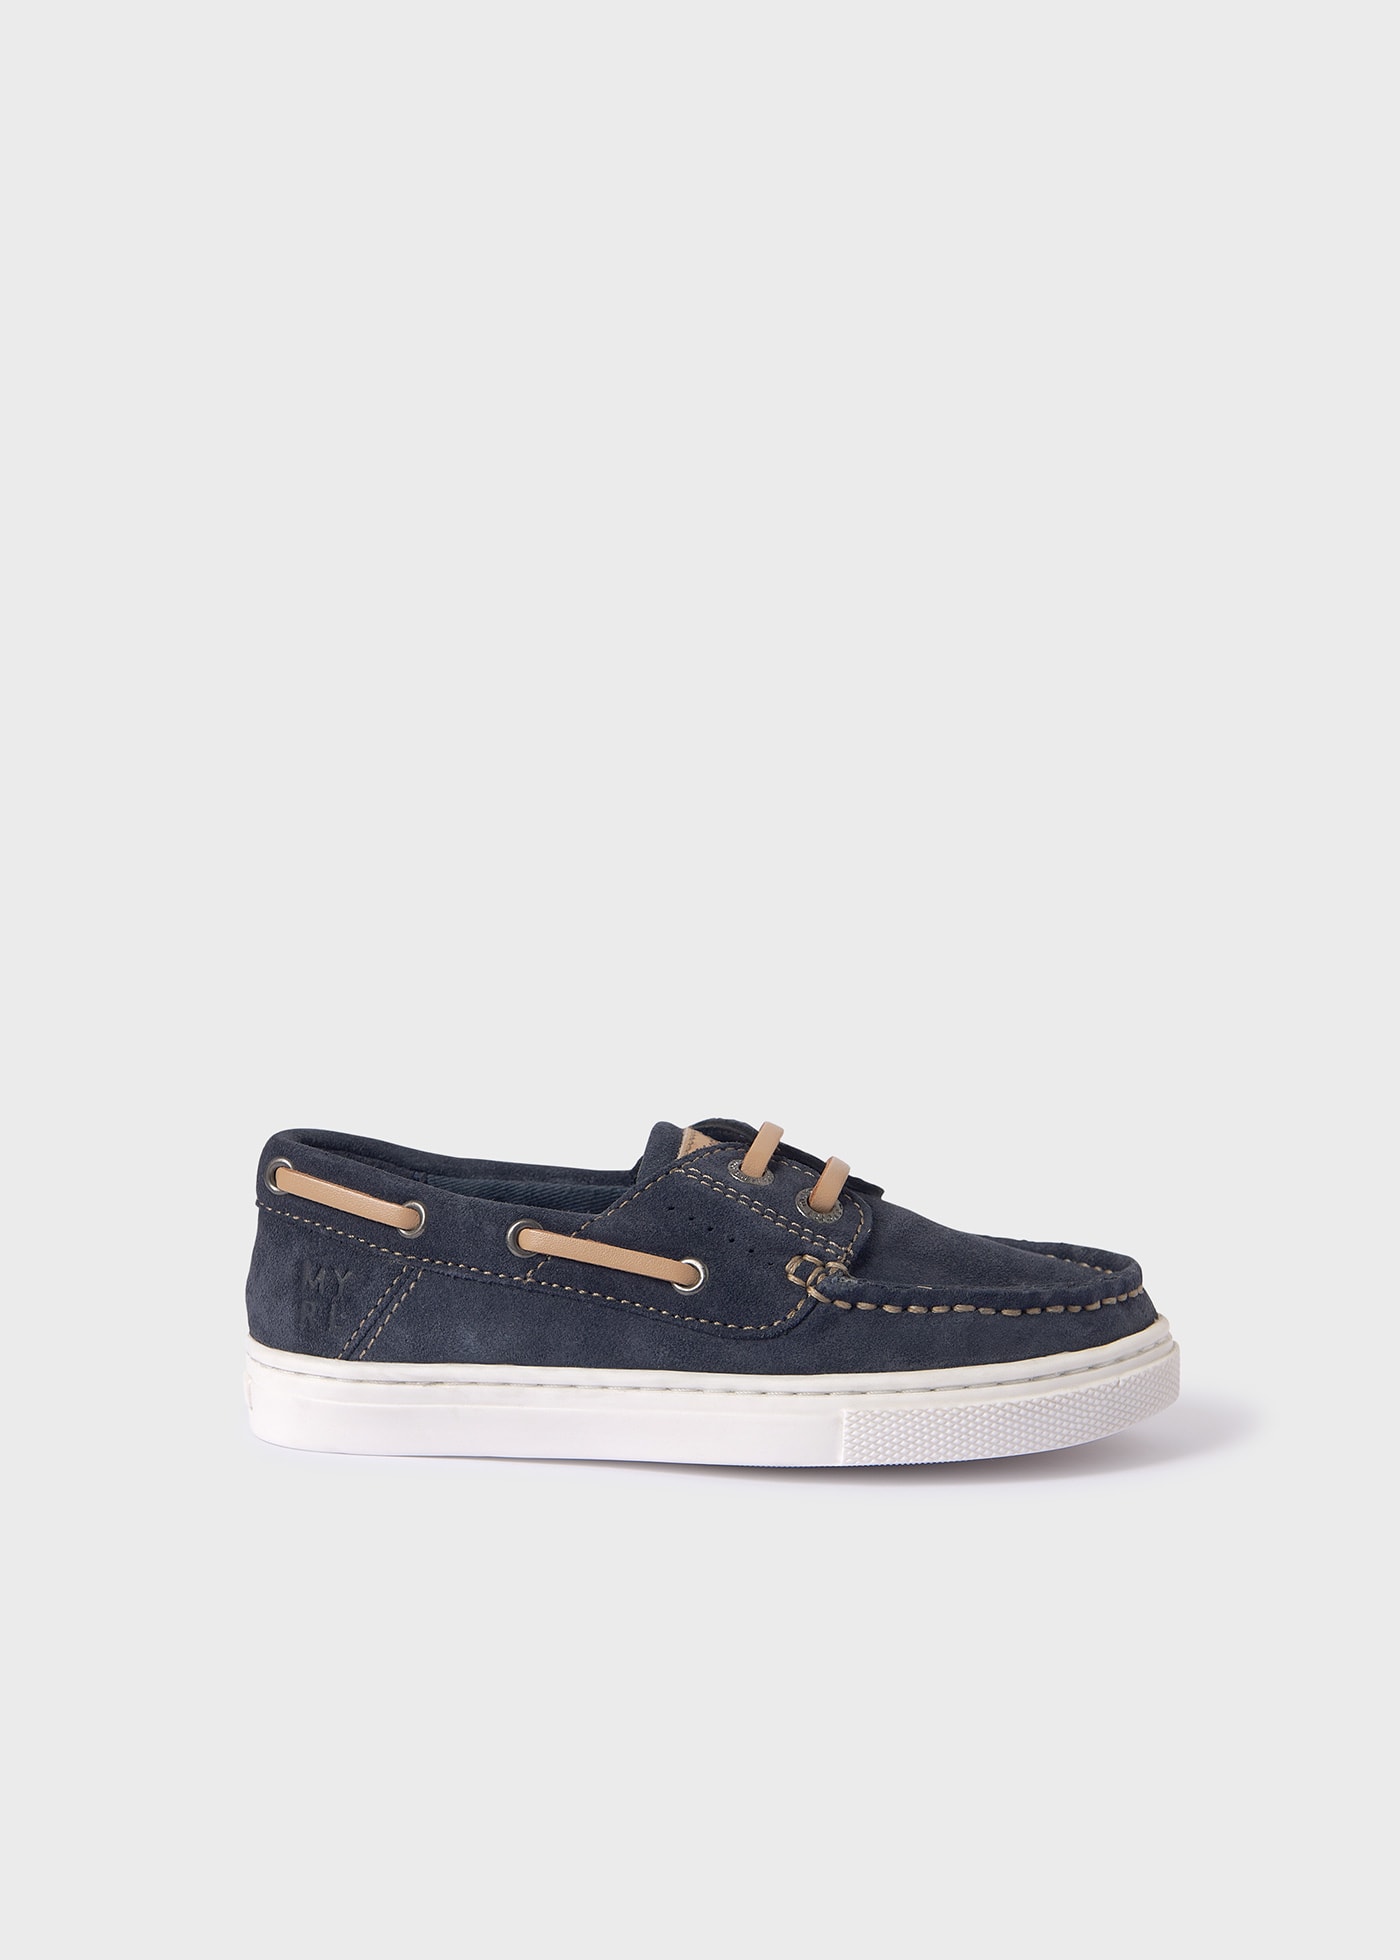 Boys boat shoes sustainable leather